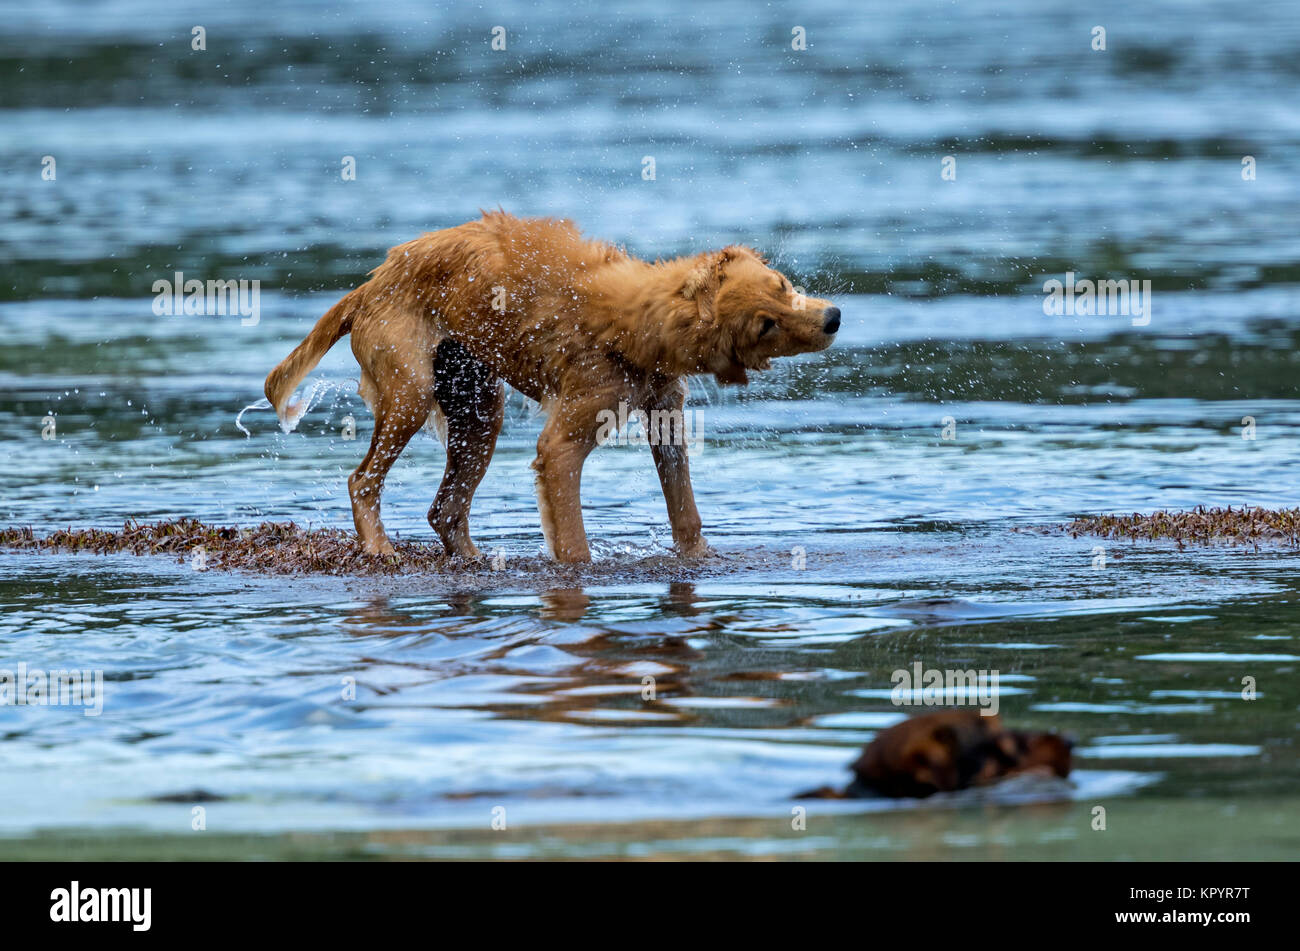 Dog shaking itself after a walk in the water and spray with water drops Stock Photo